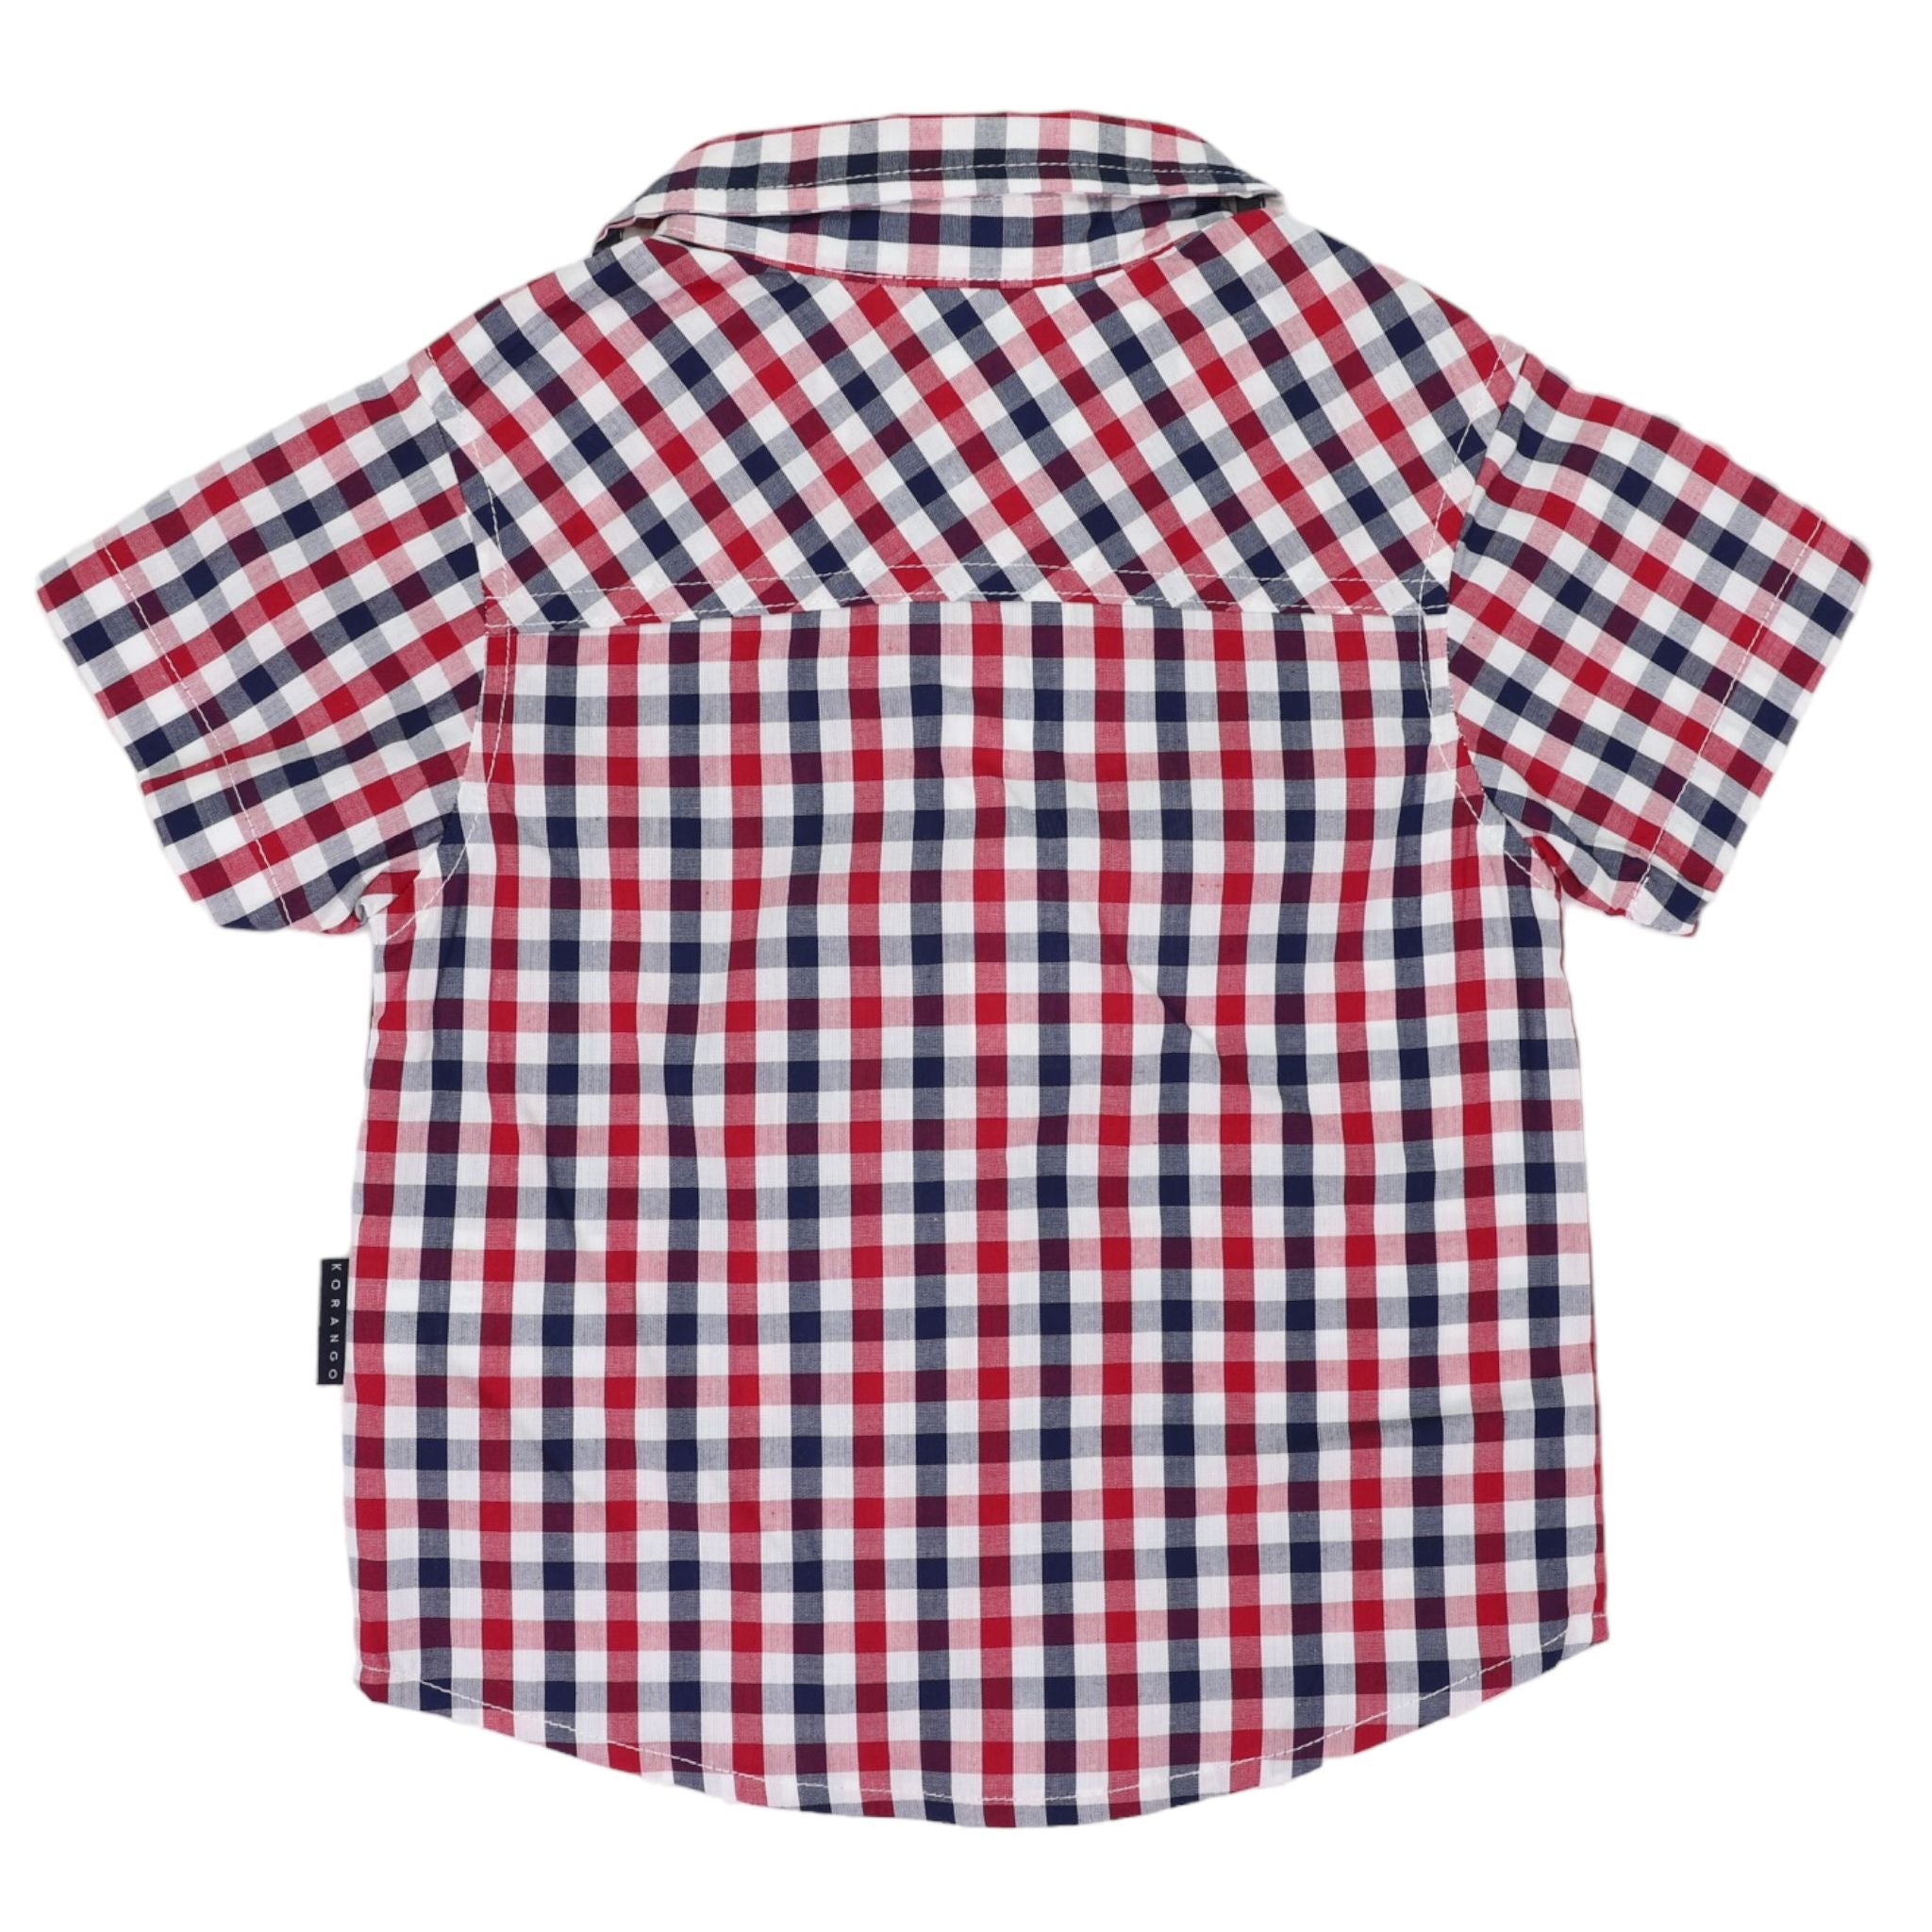 Short Sleeve Button Up Shirt - Red Check